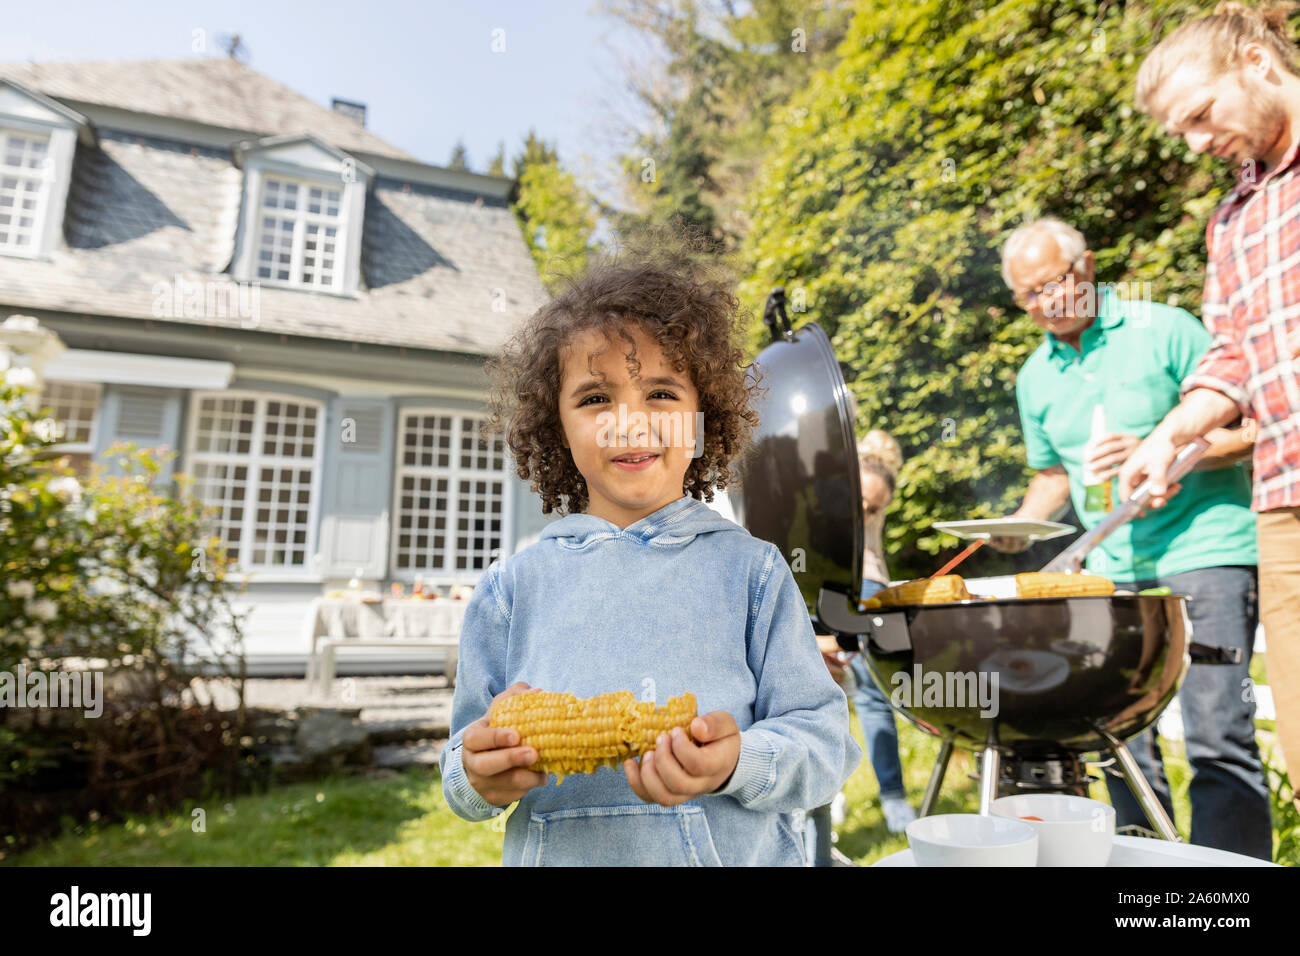 Portrait of boy with corn cob on a family barbecue in garden Stock Photo